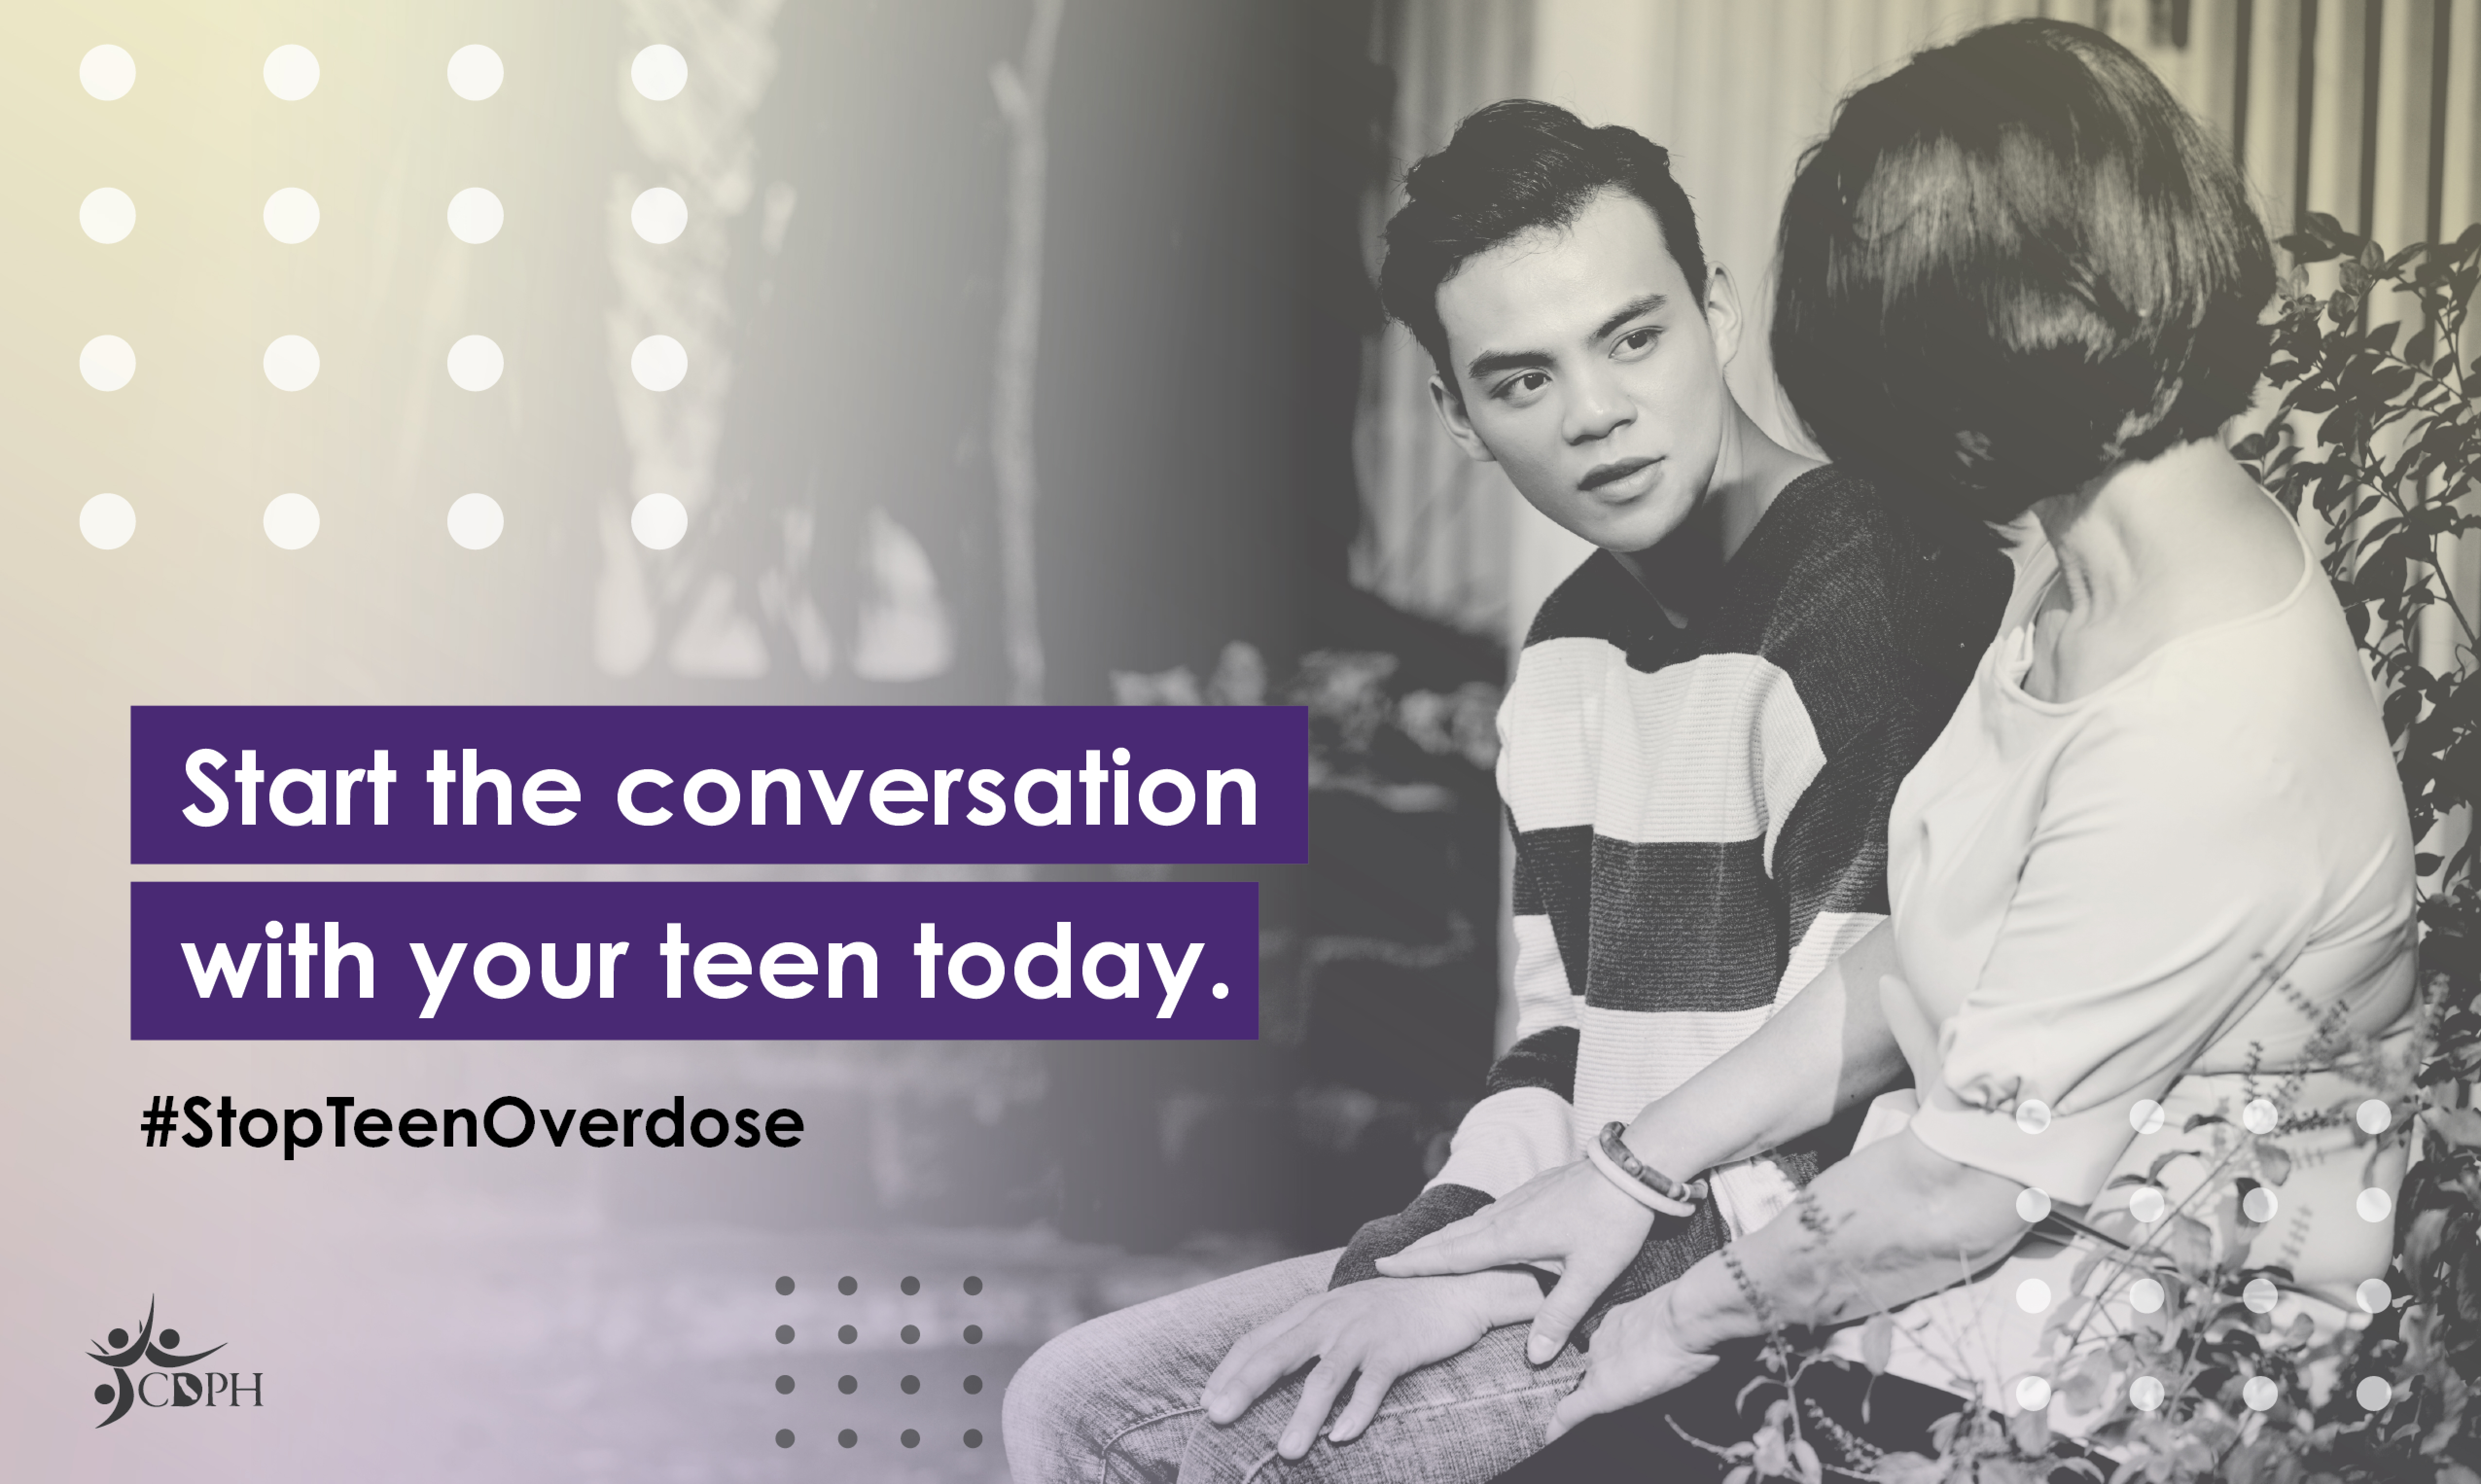 Start the conversation with your teen today